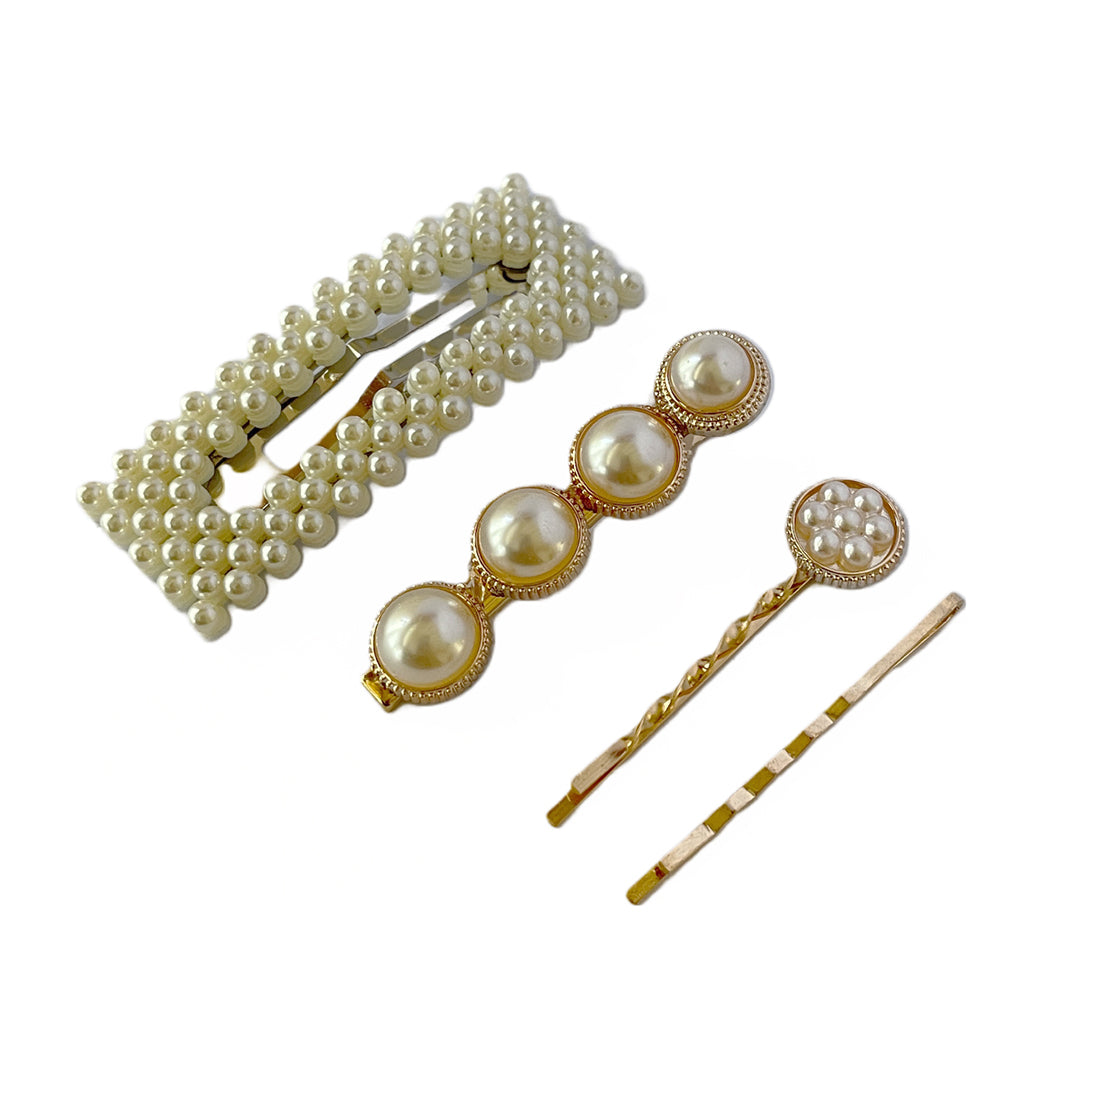 Set Of Four Statement Rose Gold-Toned Pearl Studded Hairclips